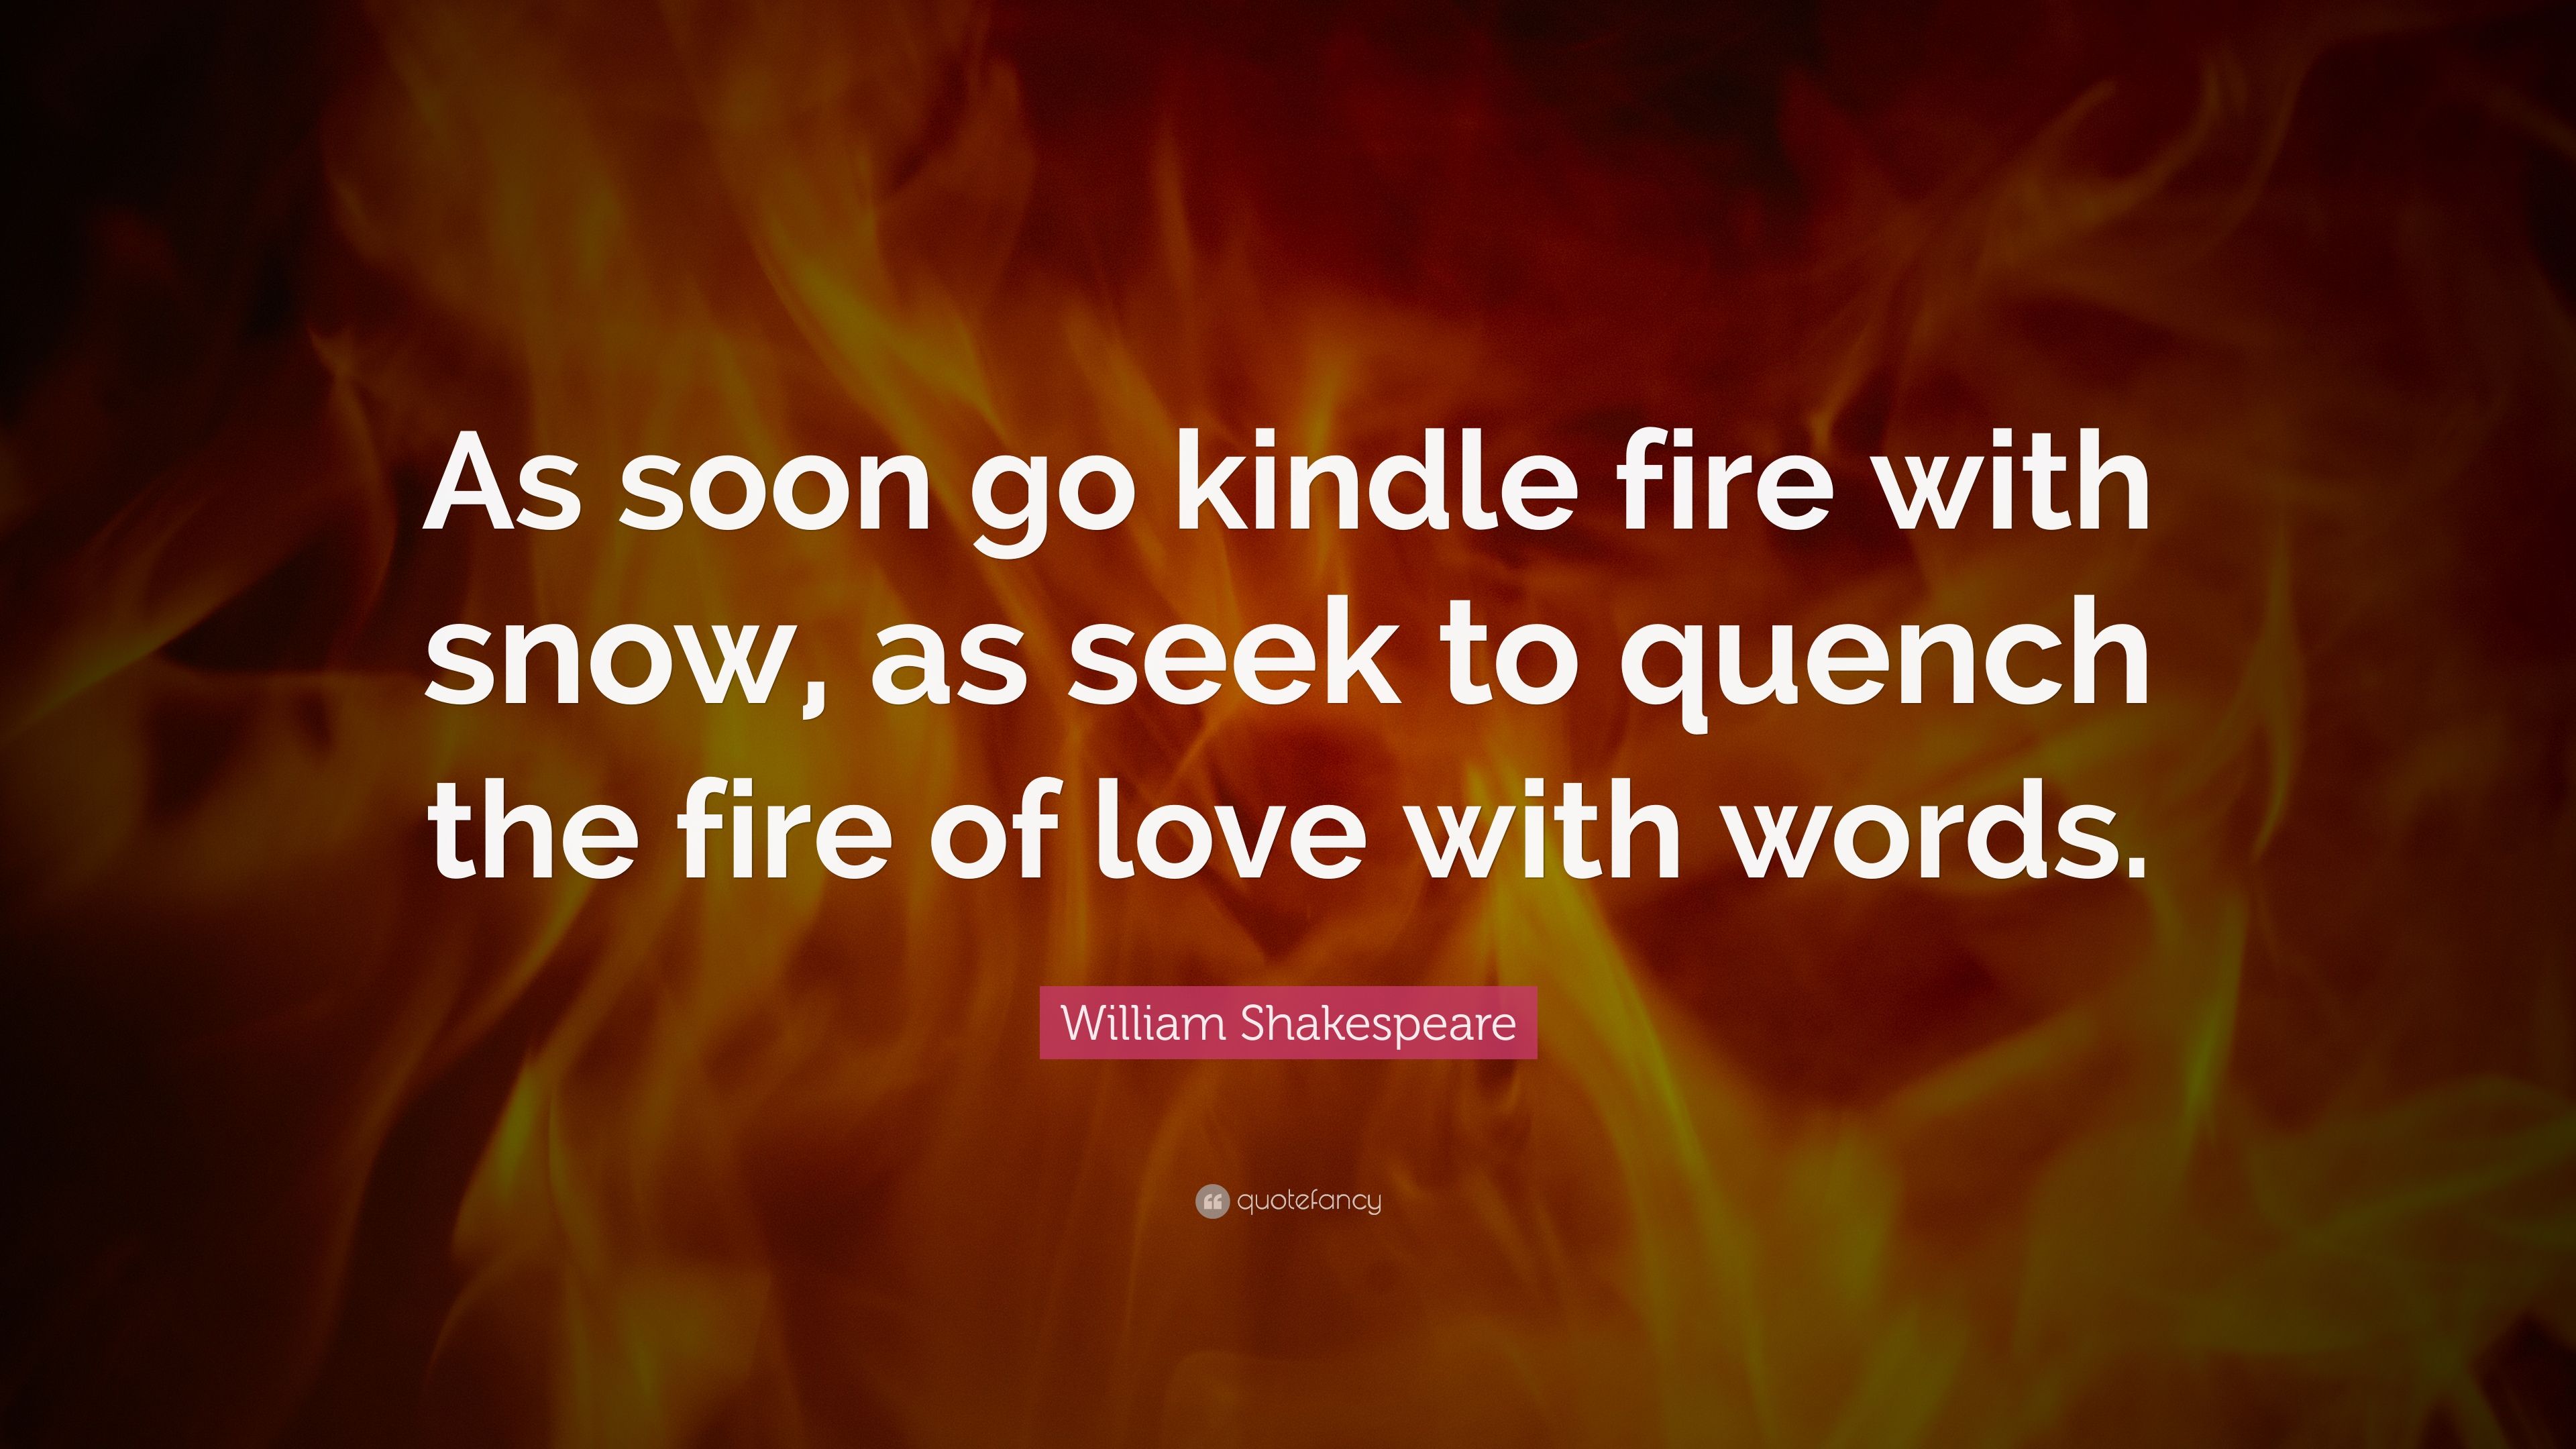 William Shakespeare Quote: “As soon go kindle fire with snow, as ...